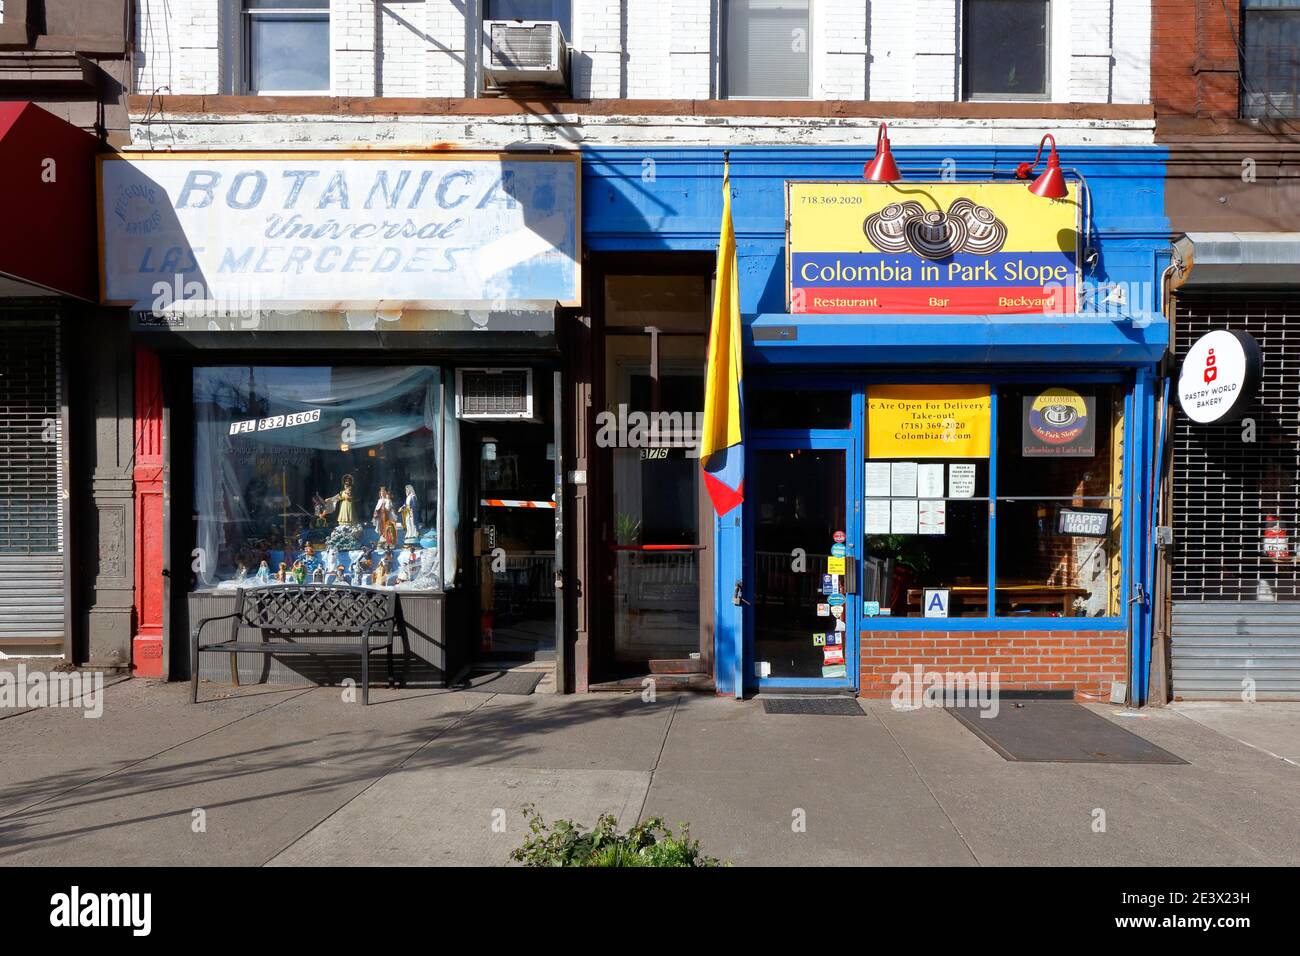 Colombia in Park Slope, Universal Botanica, 376 5th Ave, Brooklyn, New York. NYC storefront photo of a Colombian restaurant and a religious store Stock Photo